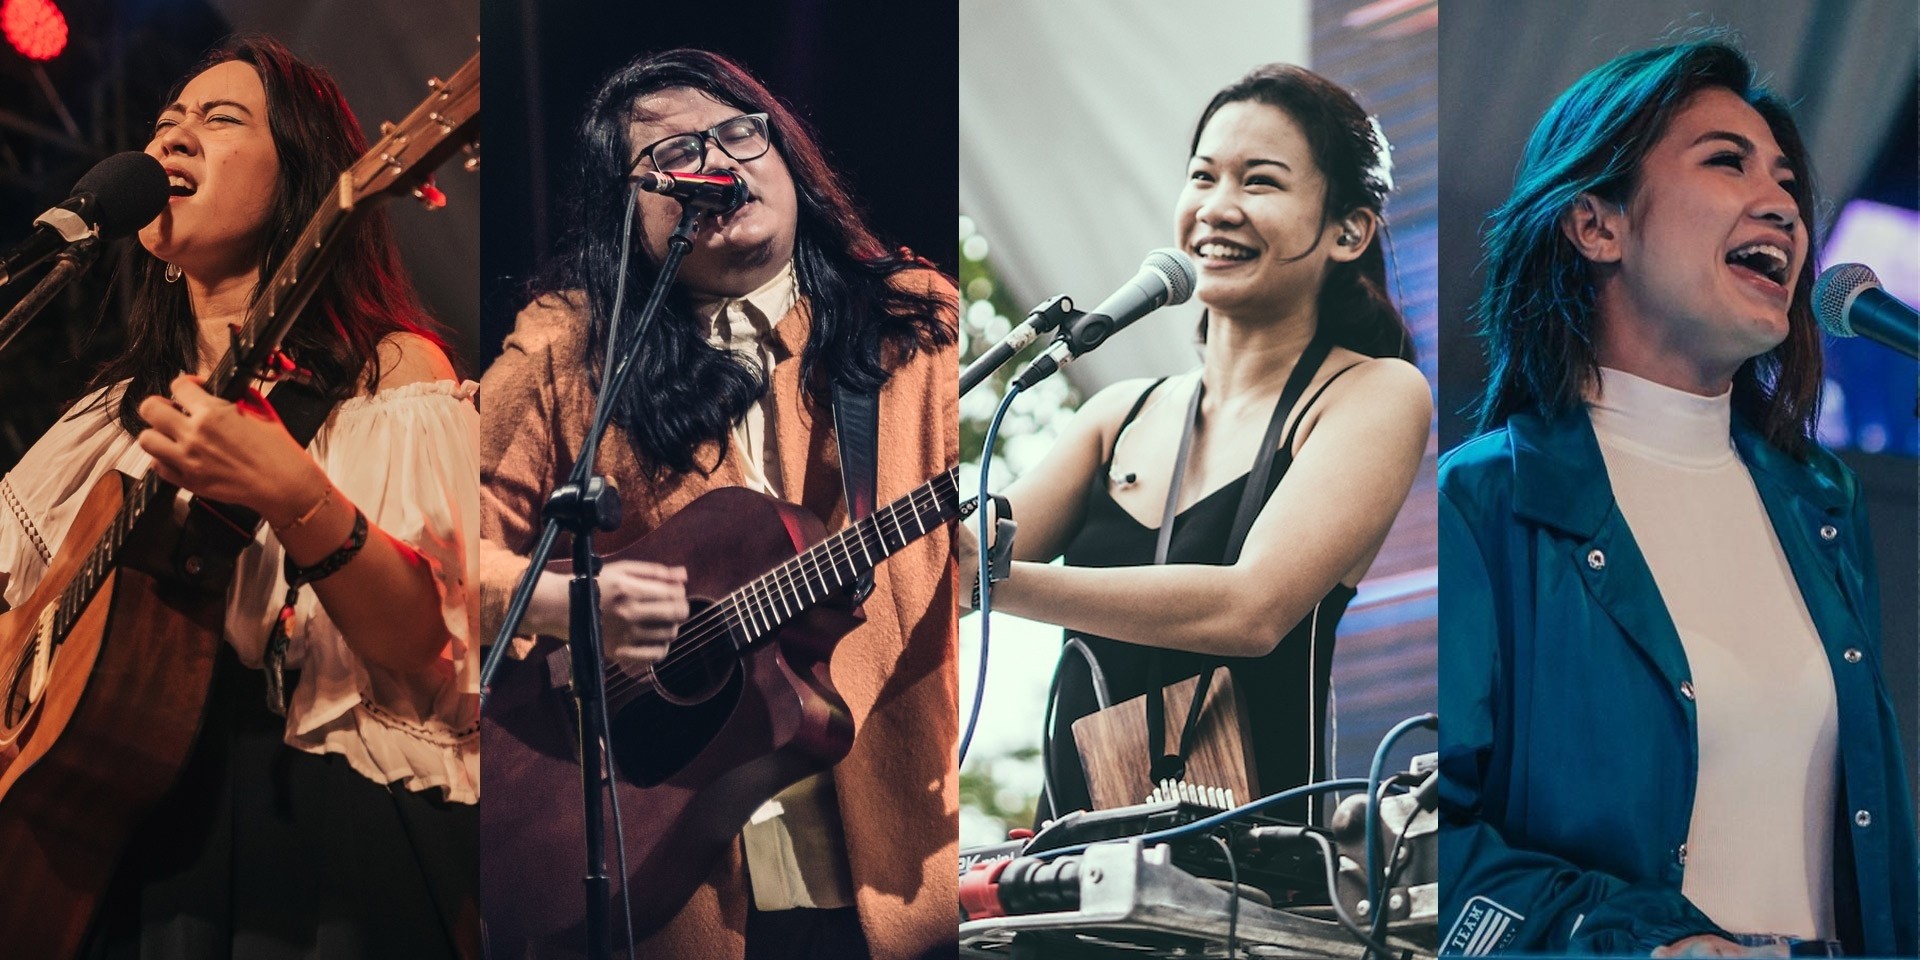 Reese Lansangan, Ben&Ben, Bea Lorenzo, Leanne and Naara, and more release new singles with Elements Music Camp